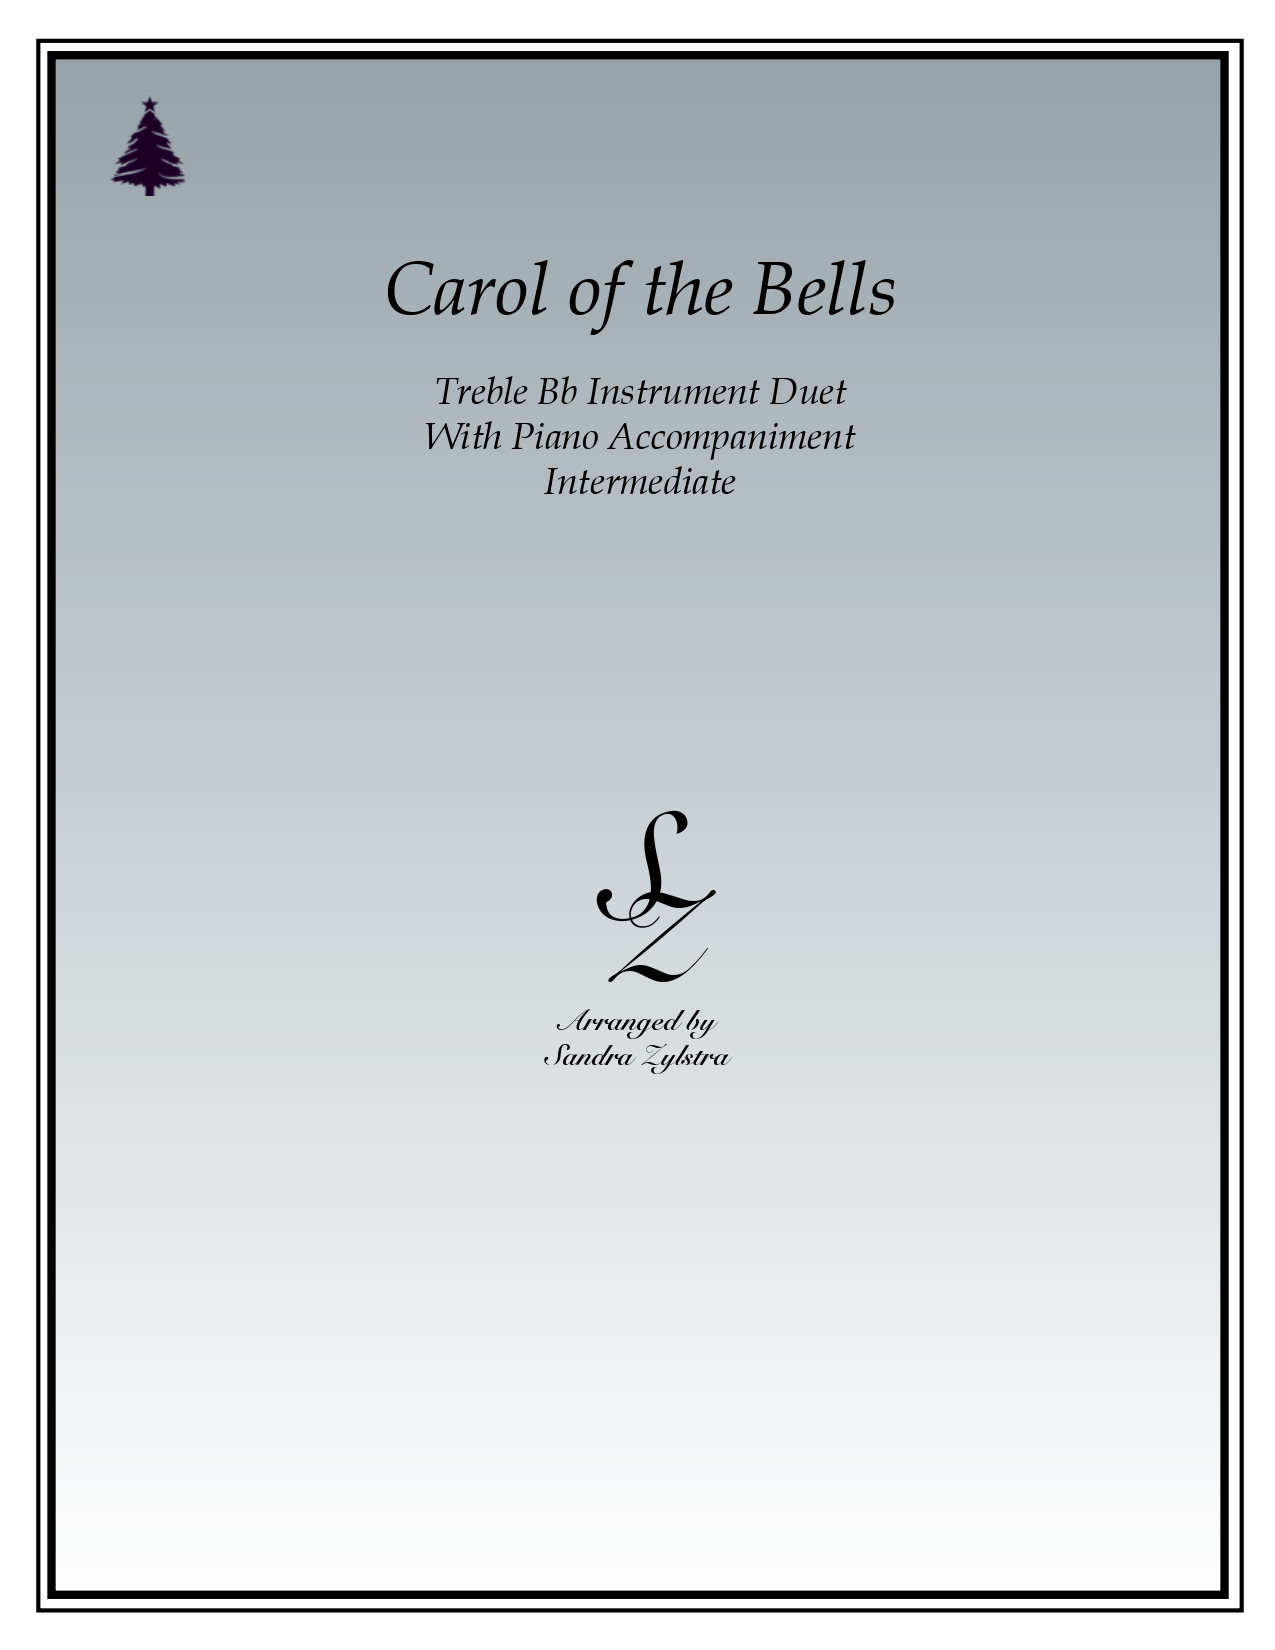 Carol Of The Bells Bb instrument duet parts cover 1 page 00011